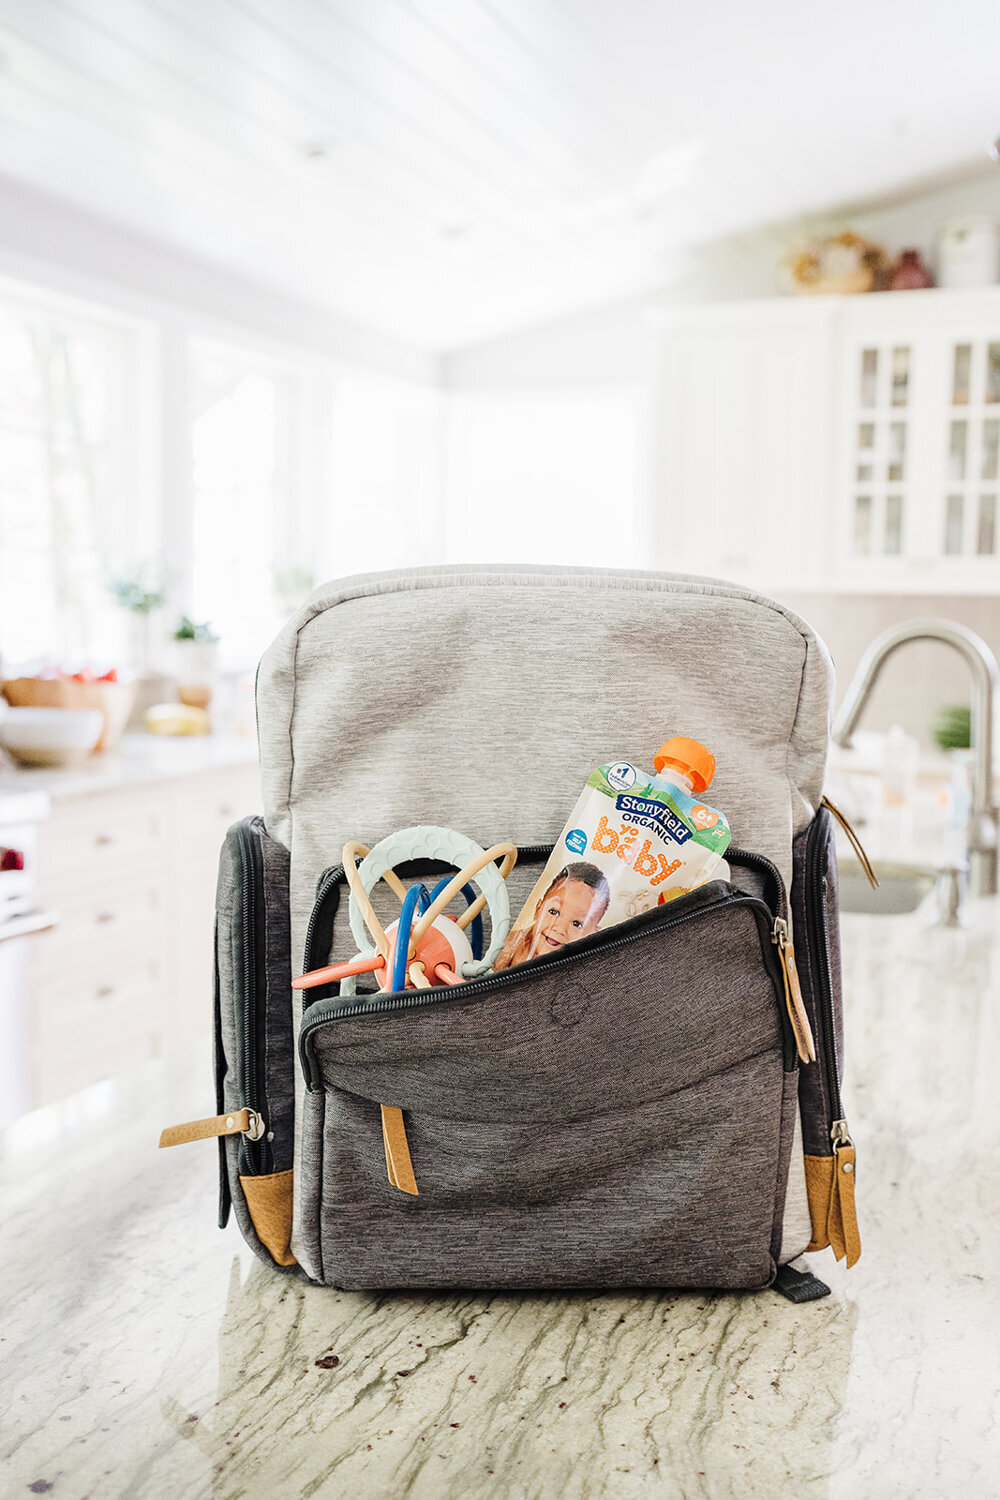 yogurt pouch and baby toy stuffed into front of backpack diaper bag